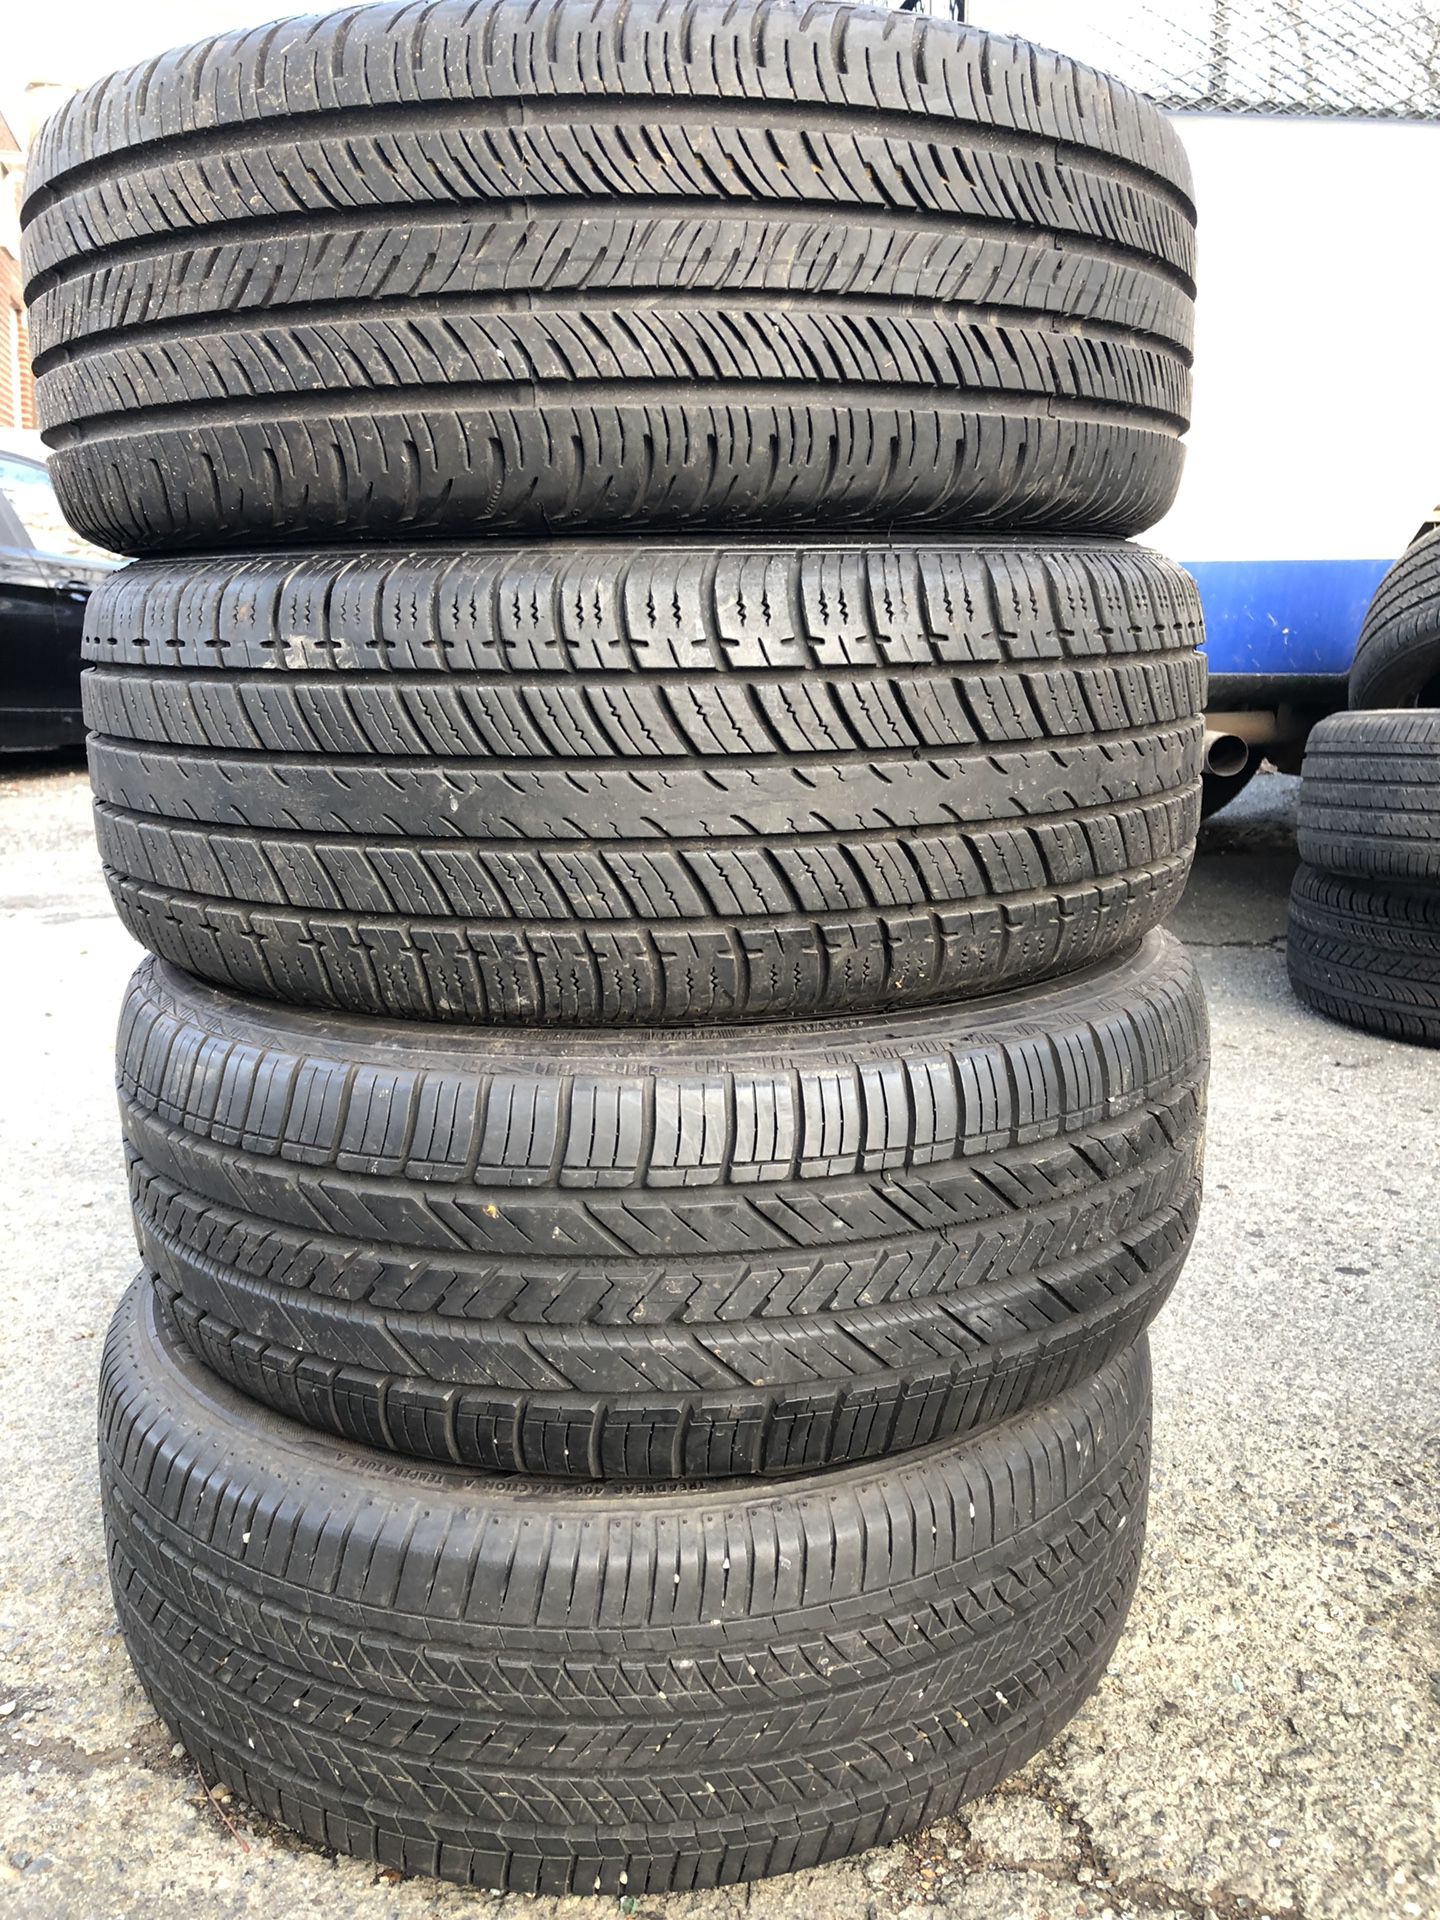 Set 4 used tire 205/55R16 Goodyear HANKOOK Continental UNIROYAL set 4 used tire $110 4 llantas usadas 205/55R16 Goodyear HANKOOK Continental